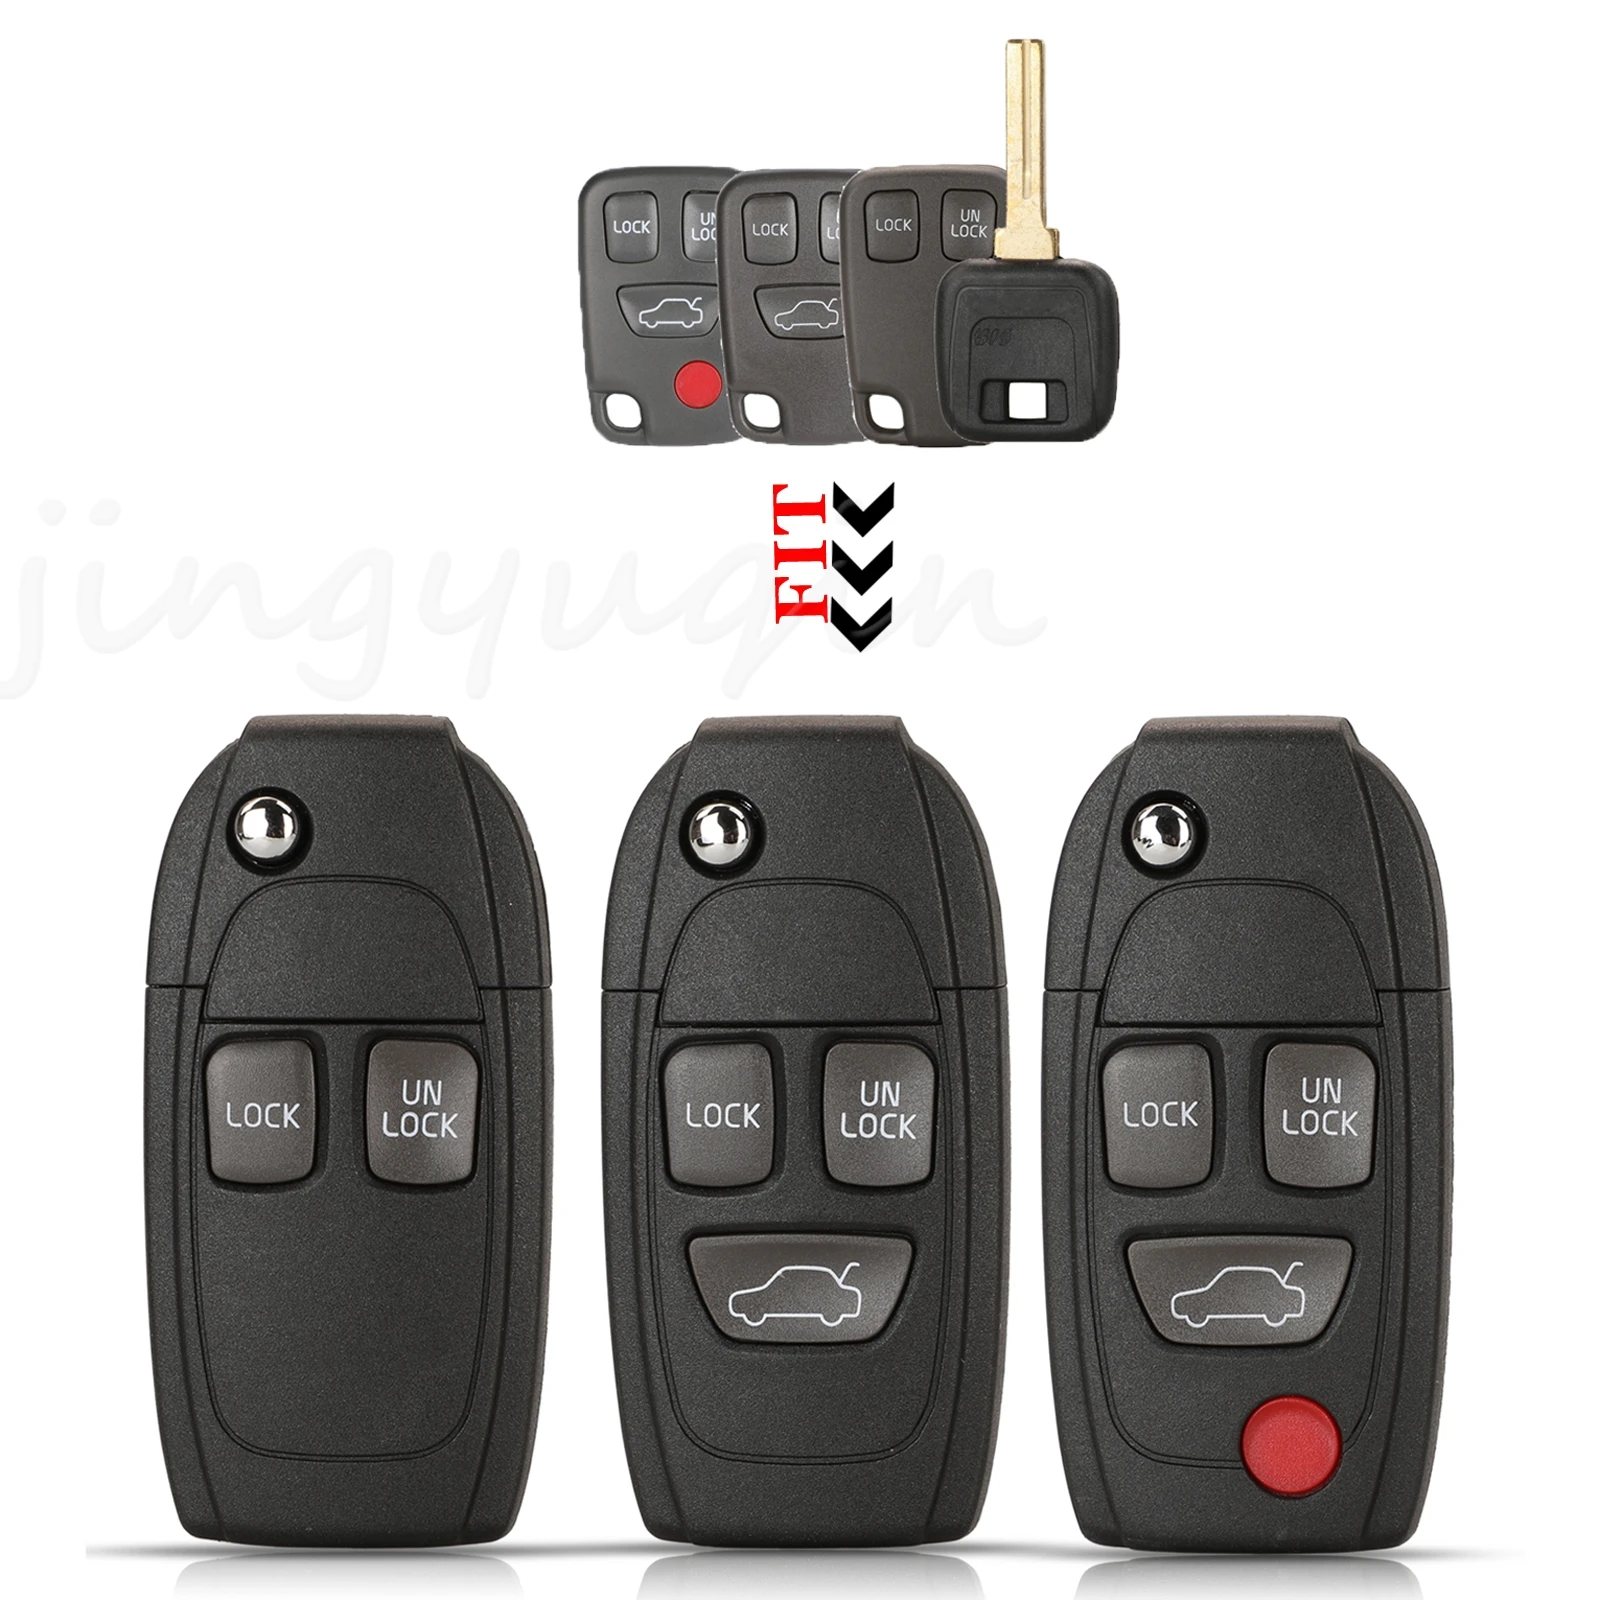 

Jingyuqin 2/3/4 Buttons Modified Remote Car Key Shell Case For Volvo S60 XC90 V50 S40 V70 S60 S70 S80 XC70